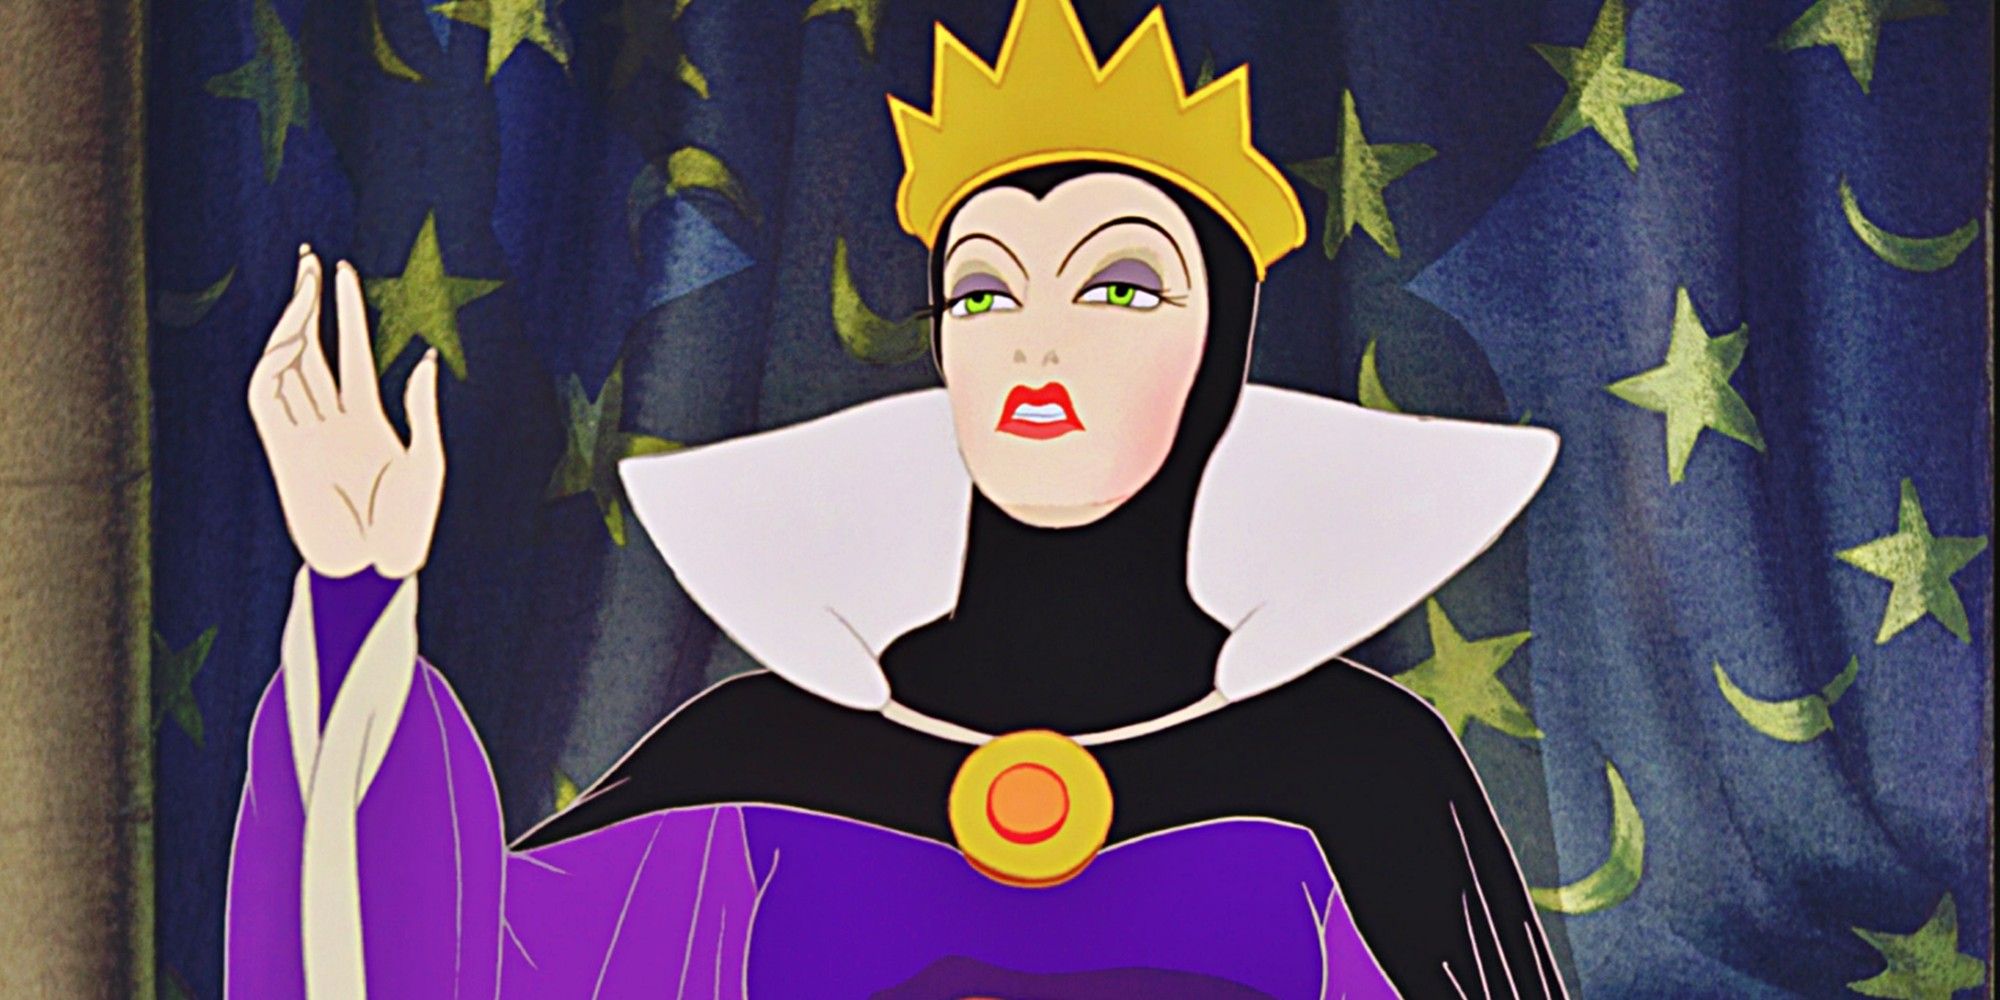 Evil Queen from Snow White raising a hand